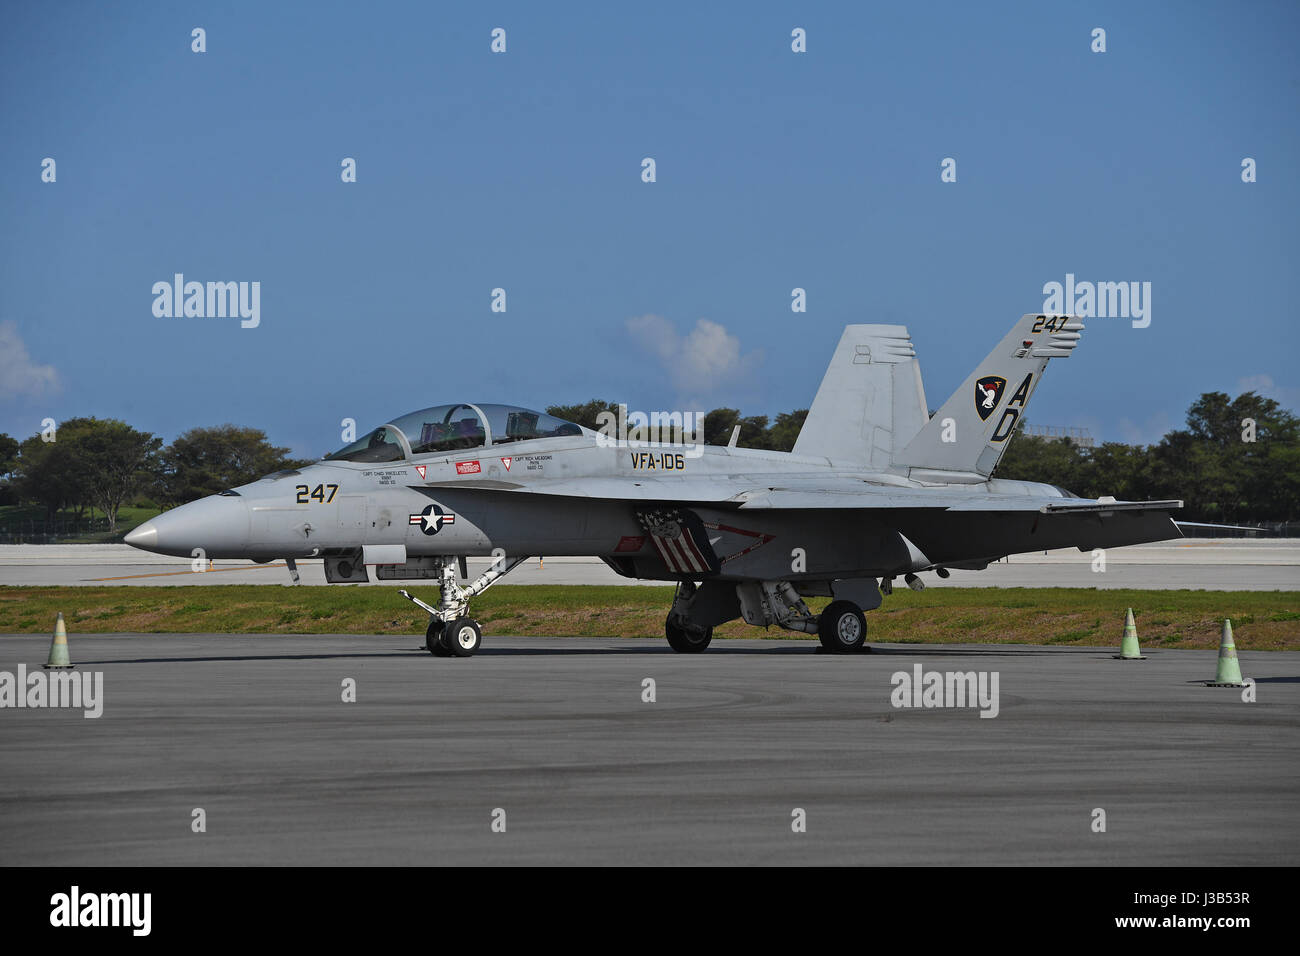 FORT LAUDERDALE FL - MAY 04: U.S. Navy F/A-18F Super Hornet sits on the tarmac at Fort Lauderdale Executive Airport during Fort Lauderdale Air Show Media day on May 4, 2017 in Fort Lauderdale, Florida. Credit: mpi04/MediaPunch Stock Photo